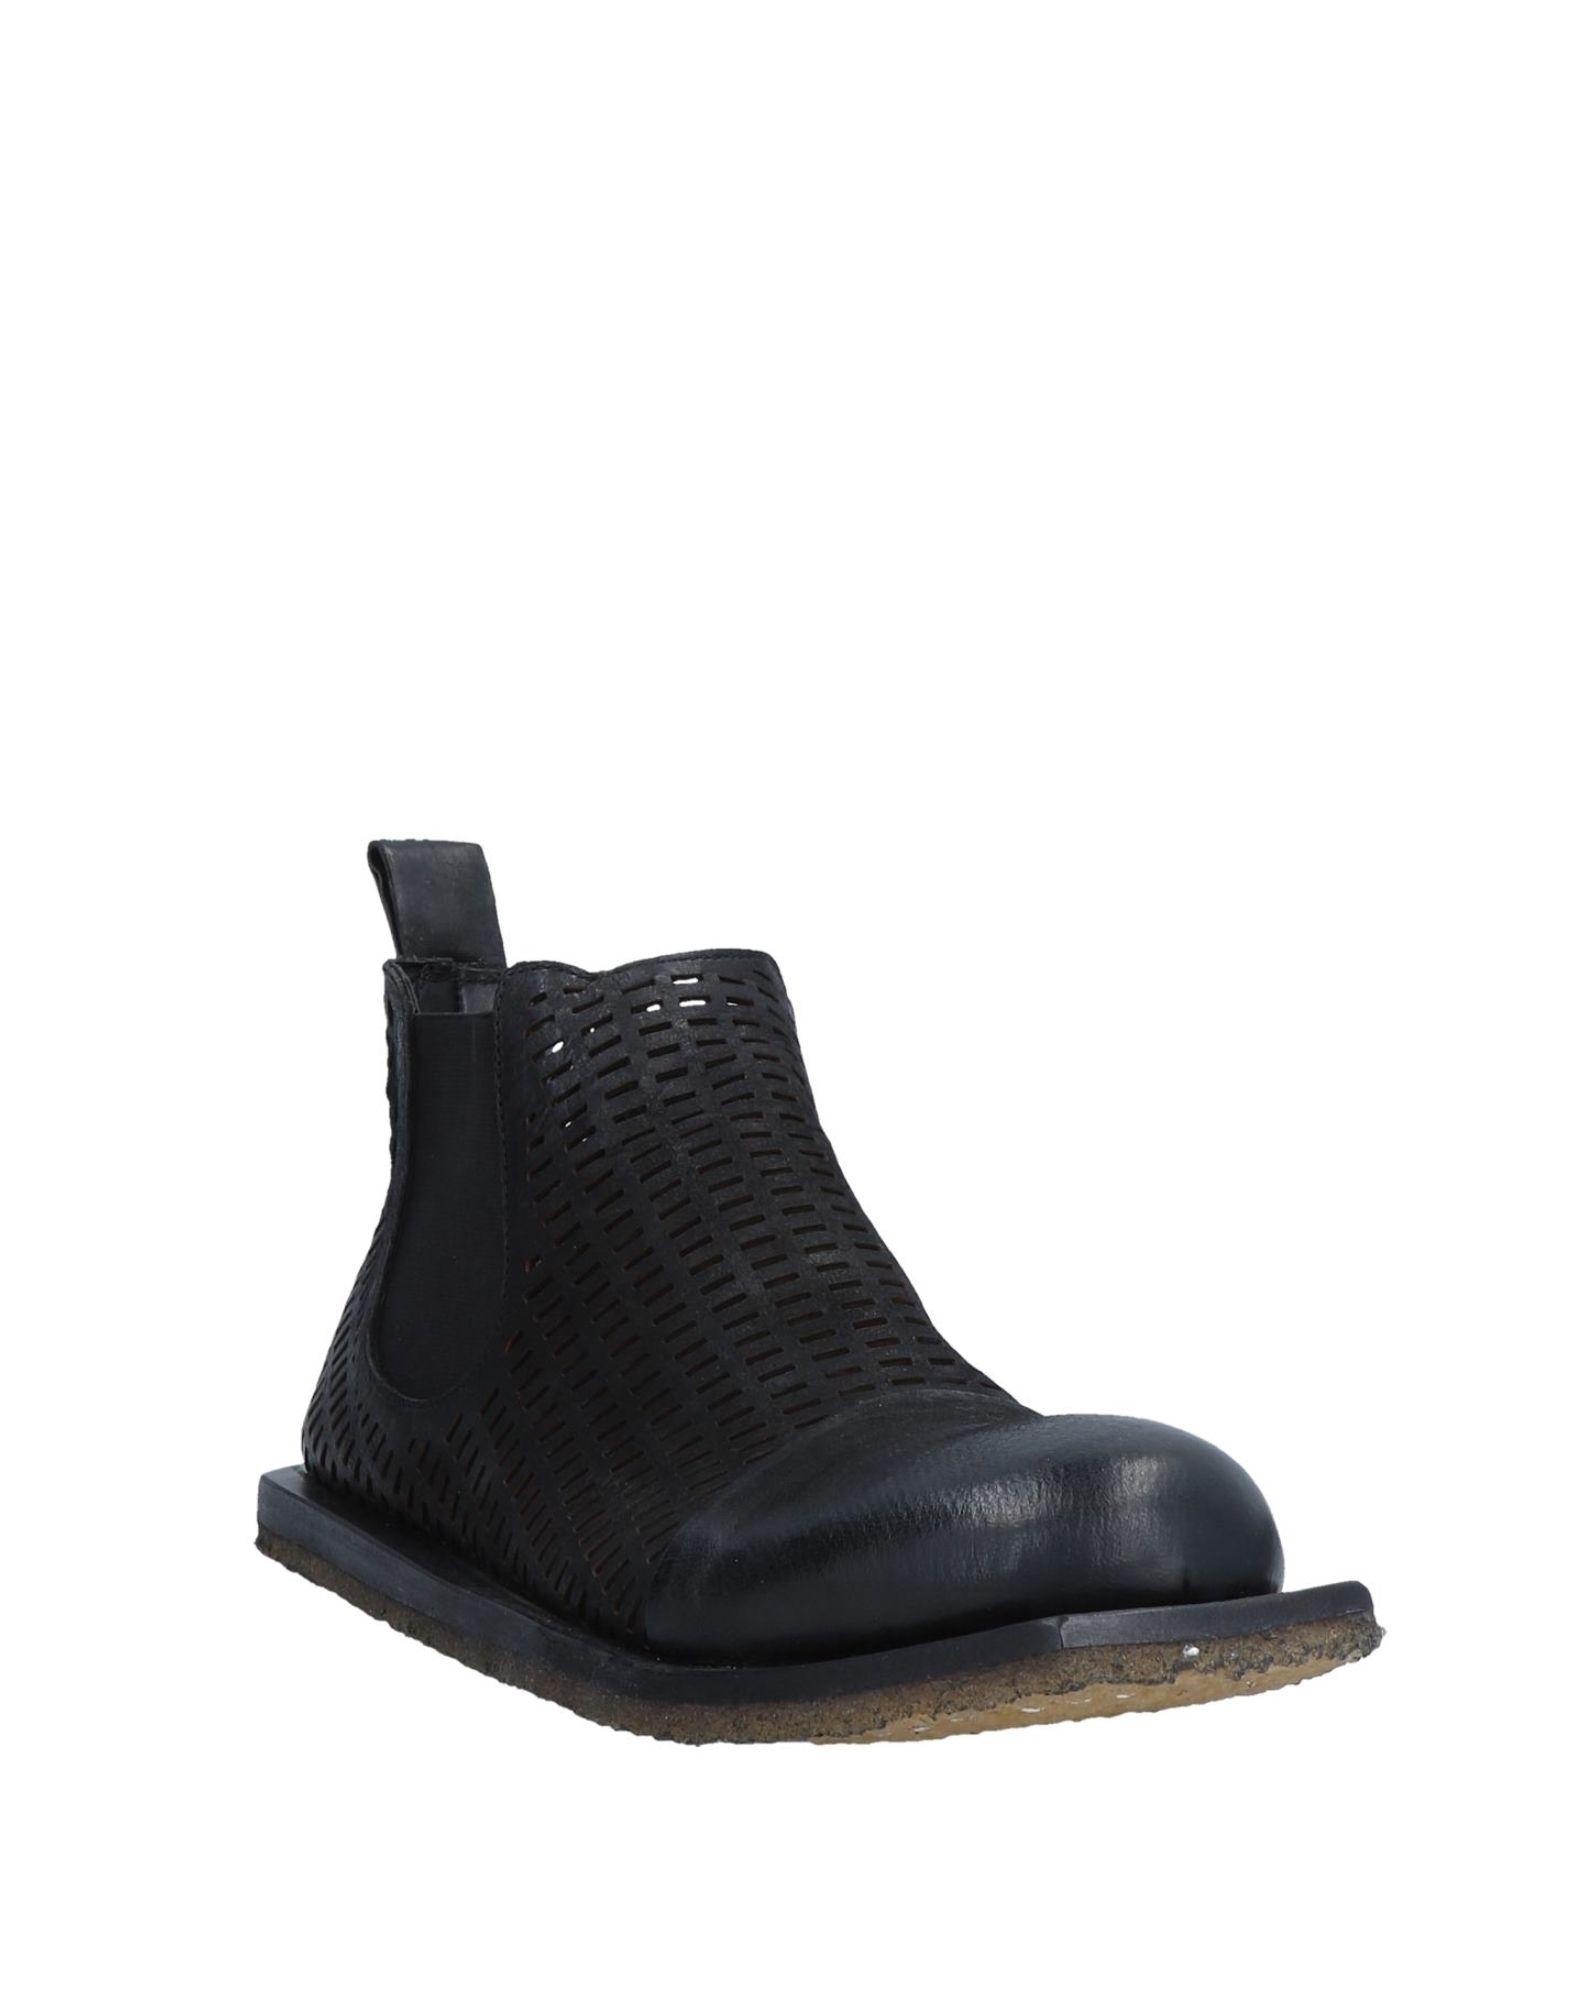 Rundholz Leather Ankle Boots in Black - Lyst